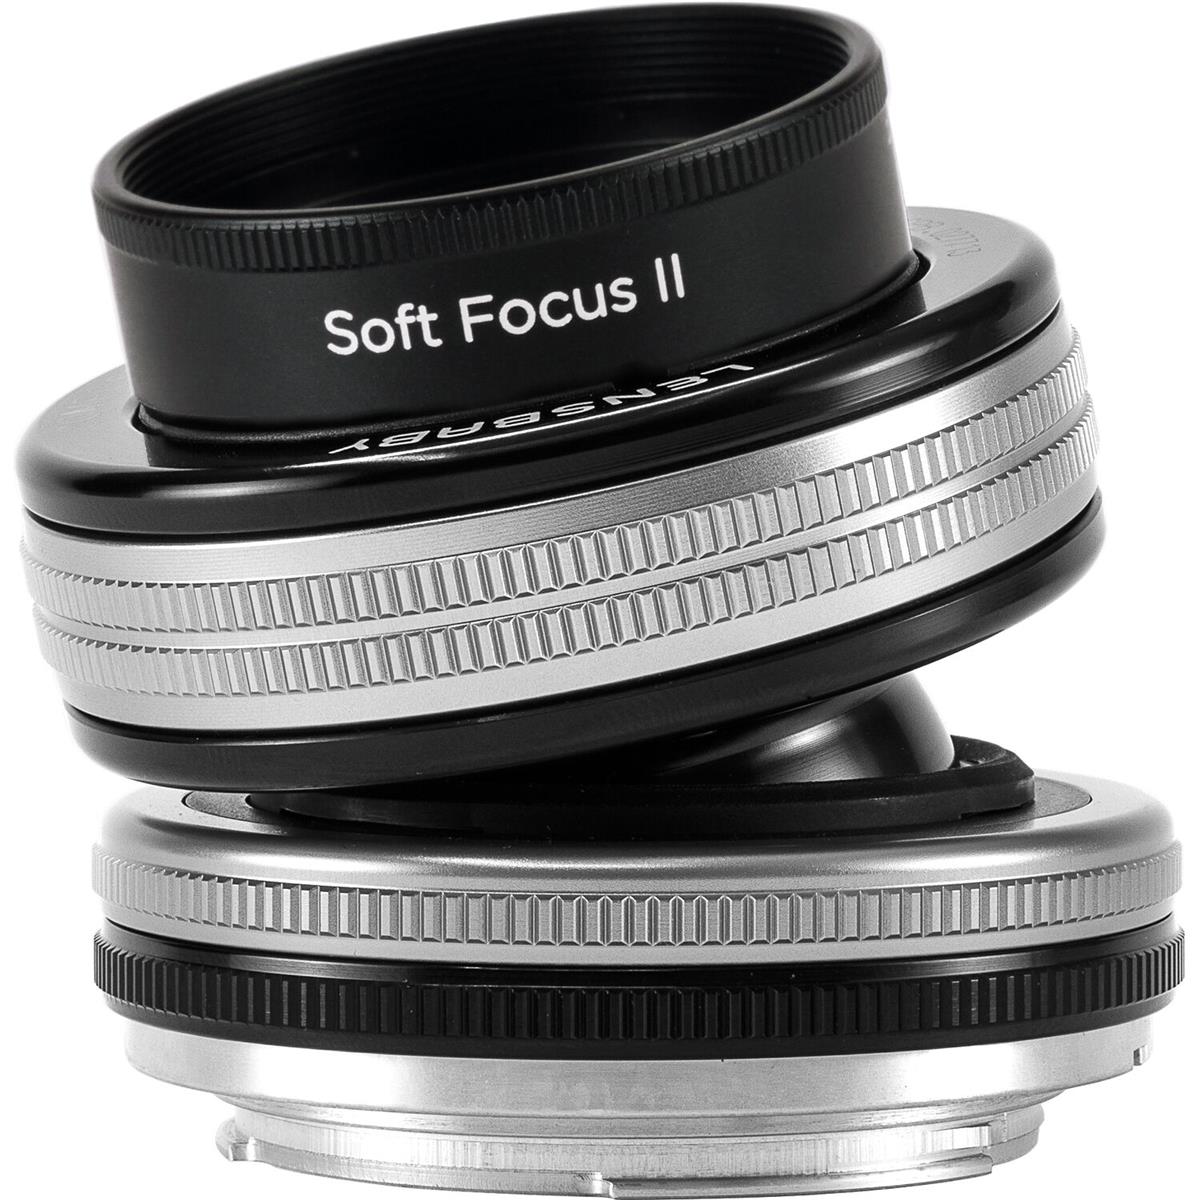 

Lensbaby Composer Pro II with Soft Focus II Optic for Nikon Z